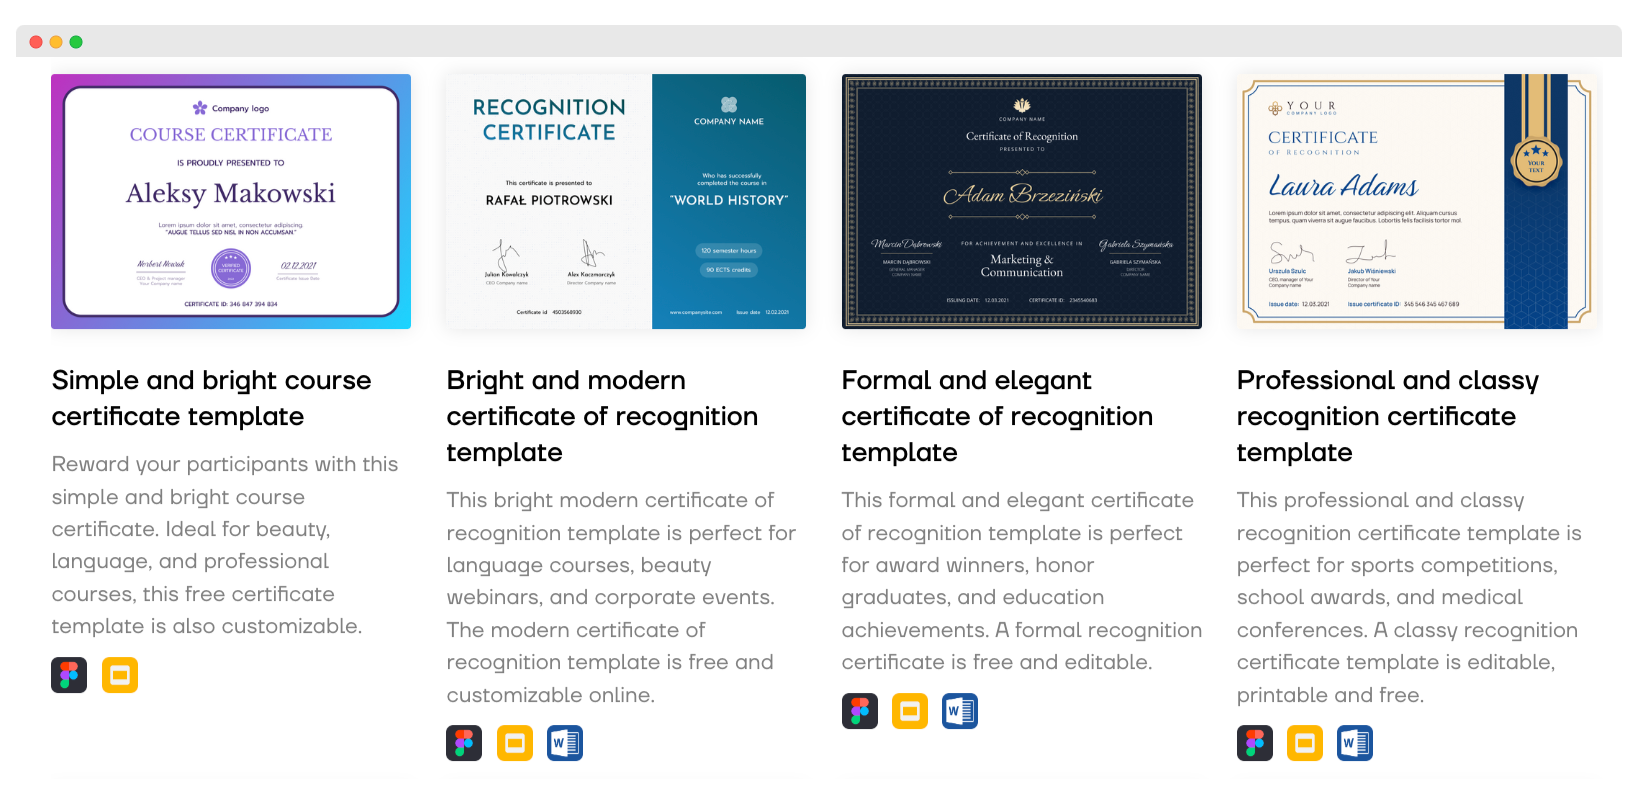 Library of certificate templates for coaching business.